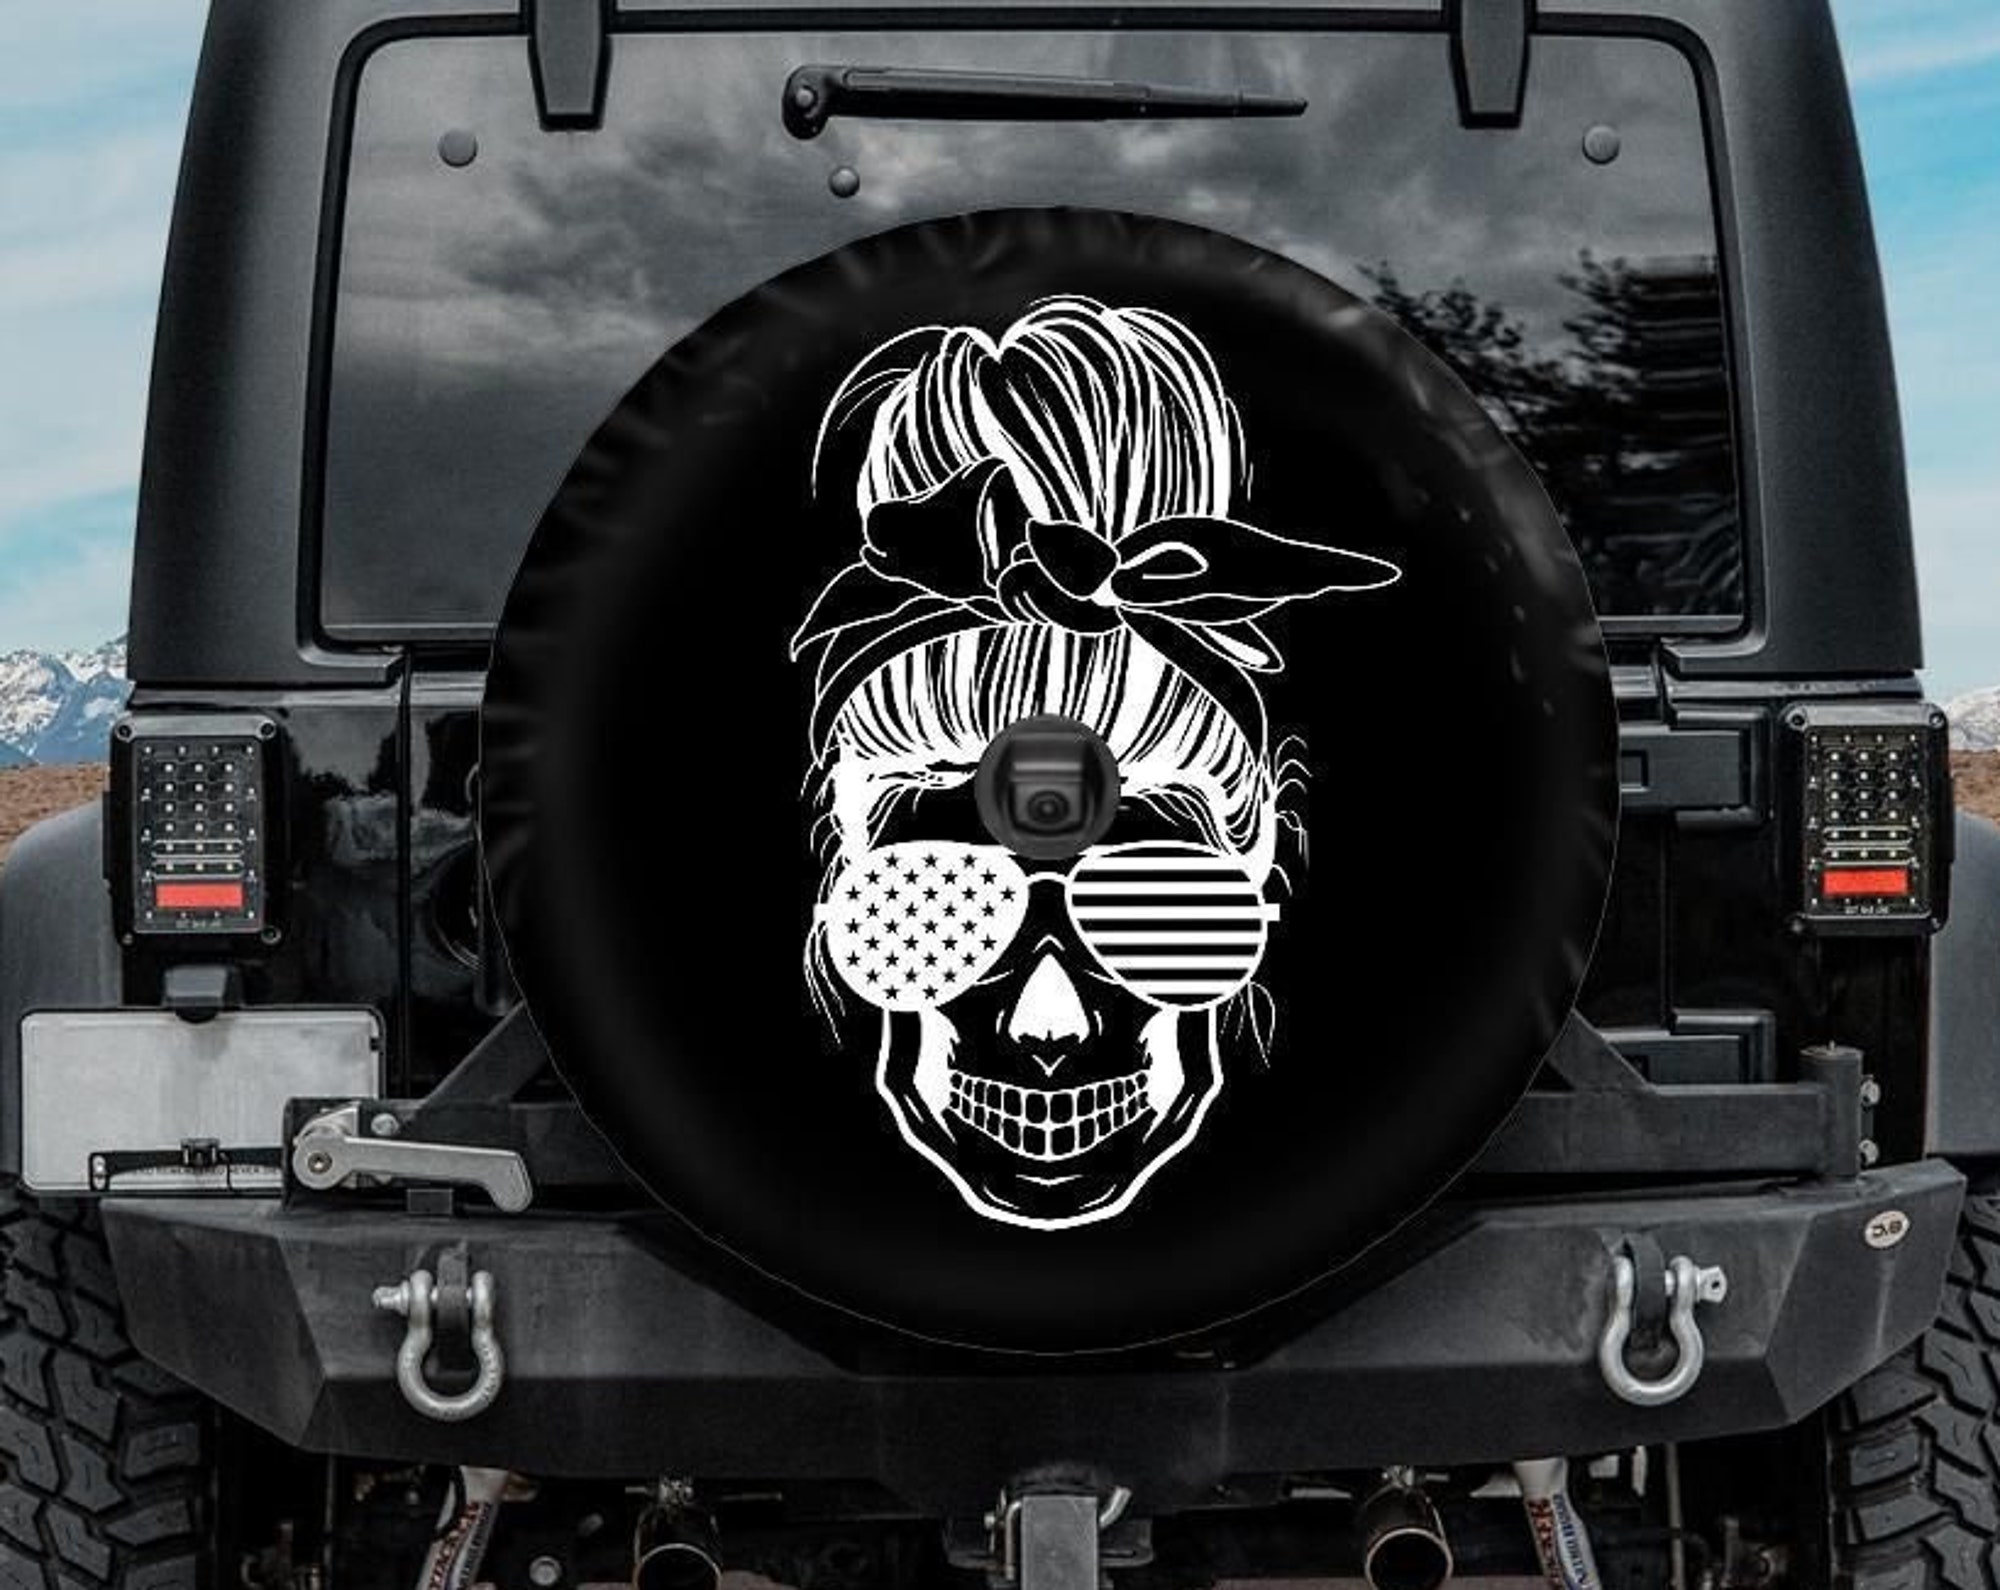 Discover Spare Tire Cover for jeep, Messy Bun Skull Tire Cover, Backup Camera Tire Cover, Merica Messy Bun Skull Tire Cover, funny spare tire cover